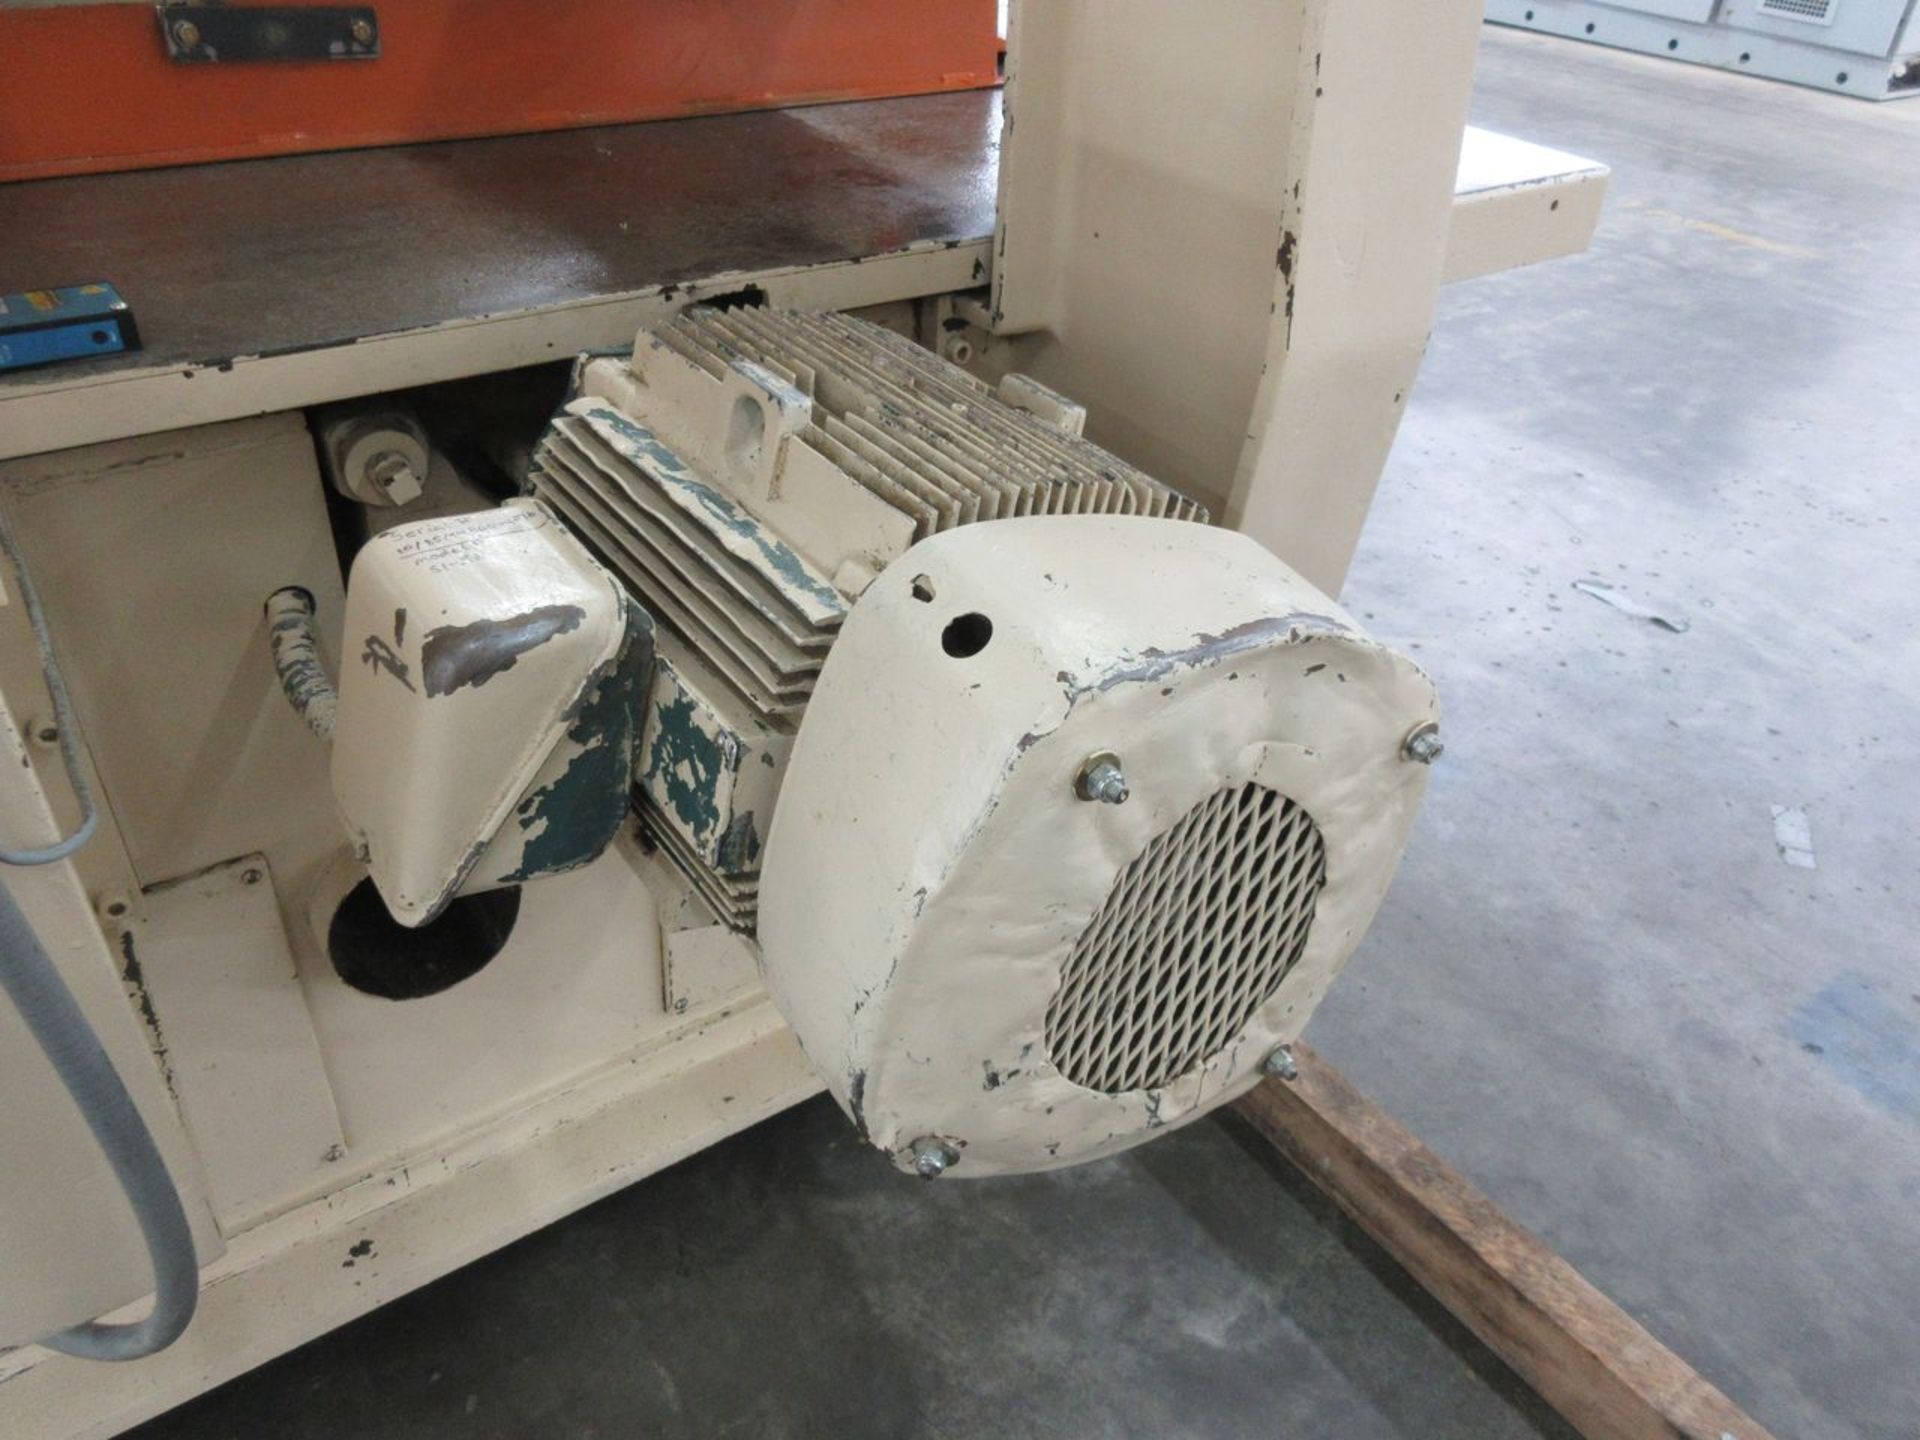 Diehl Model SL-52 Straight Line Chain-Fed Rip Saw, S/N: 10/85M4860-4276; with 25 in. Throat, 15-HP - Image 6 of 7